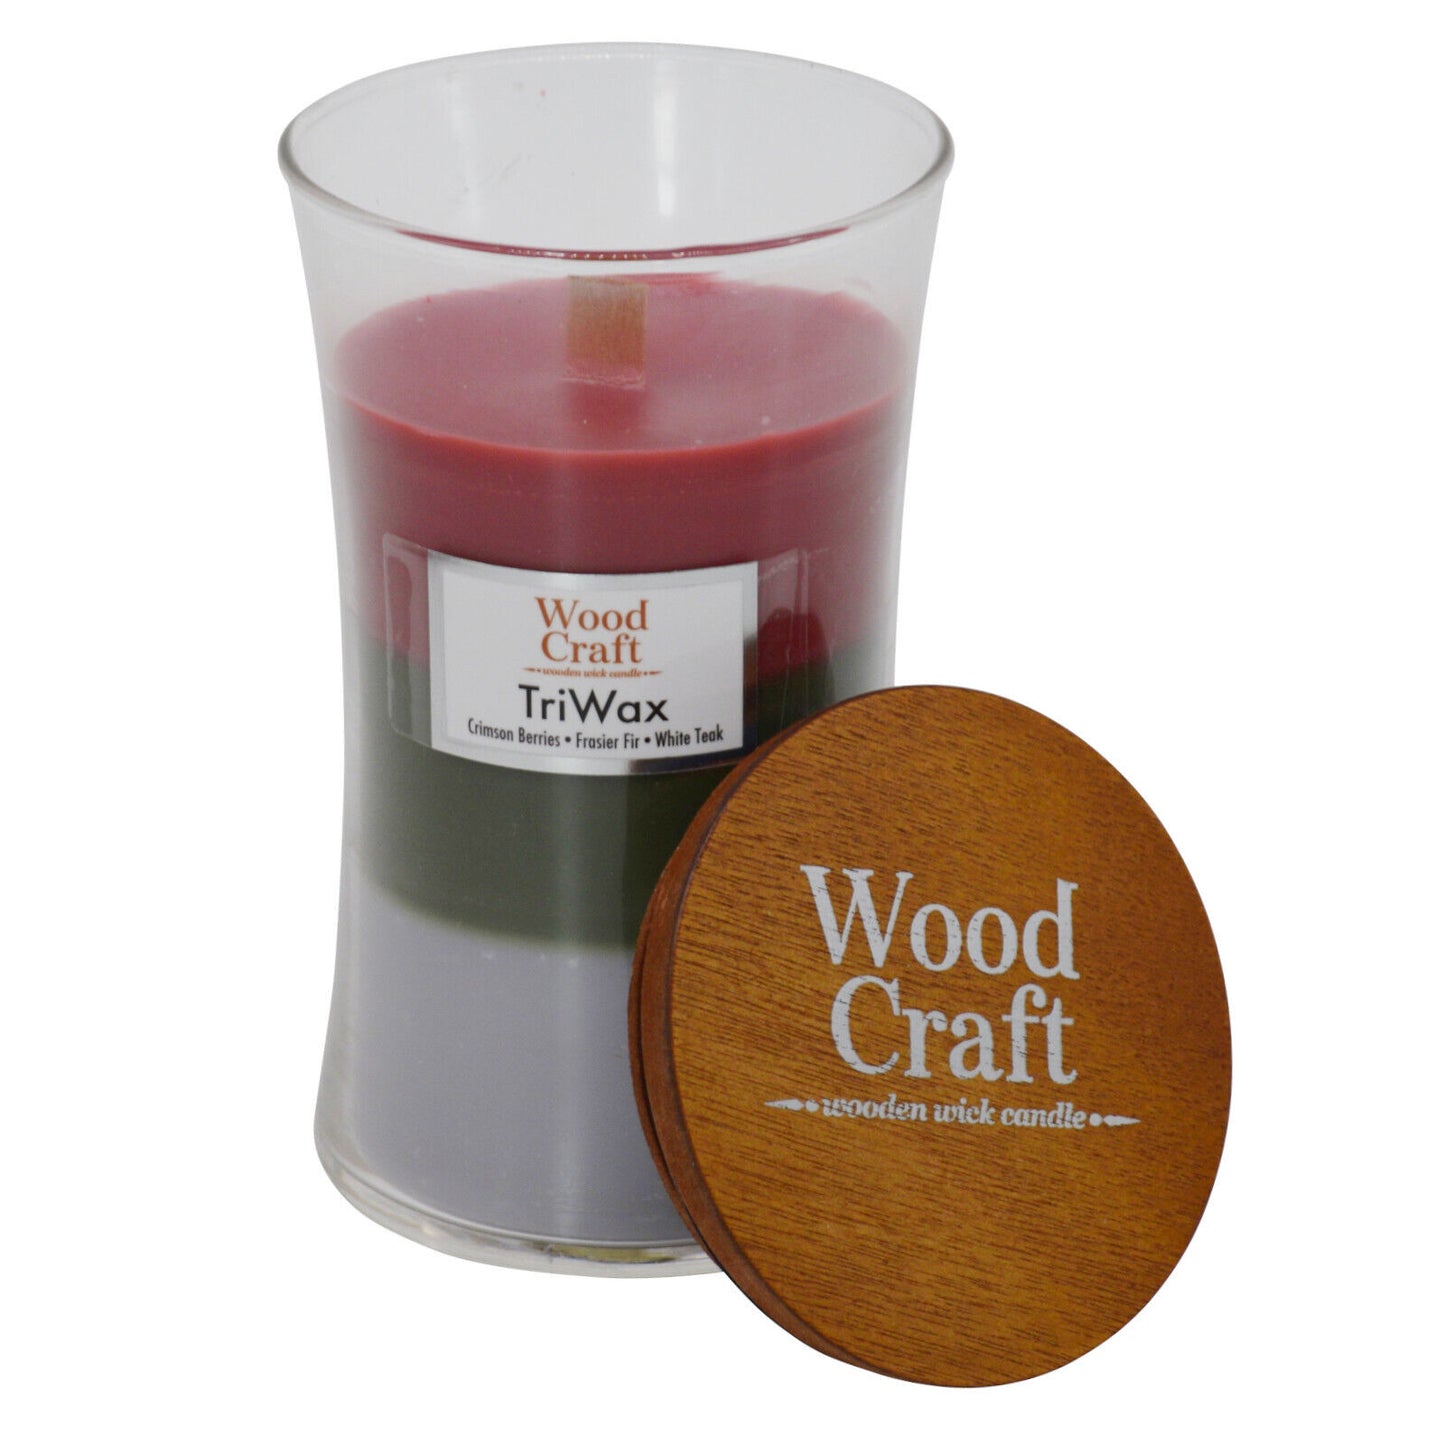 3x Woodcraft Large Hourglass Crackling Wooden Wick Scented Candle 595g/145 Hour